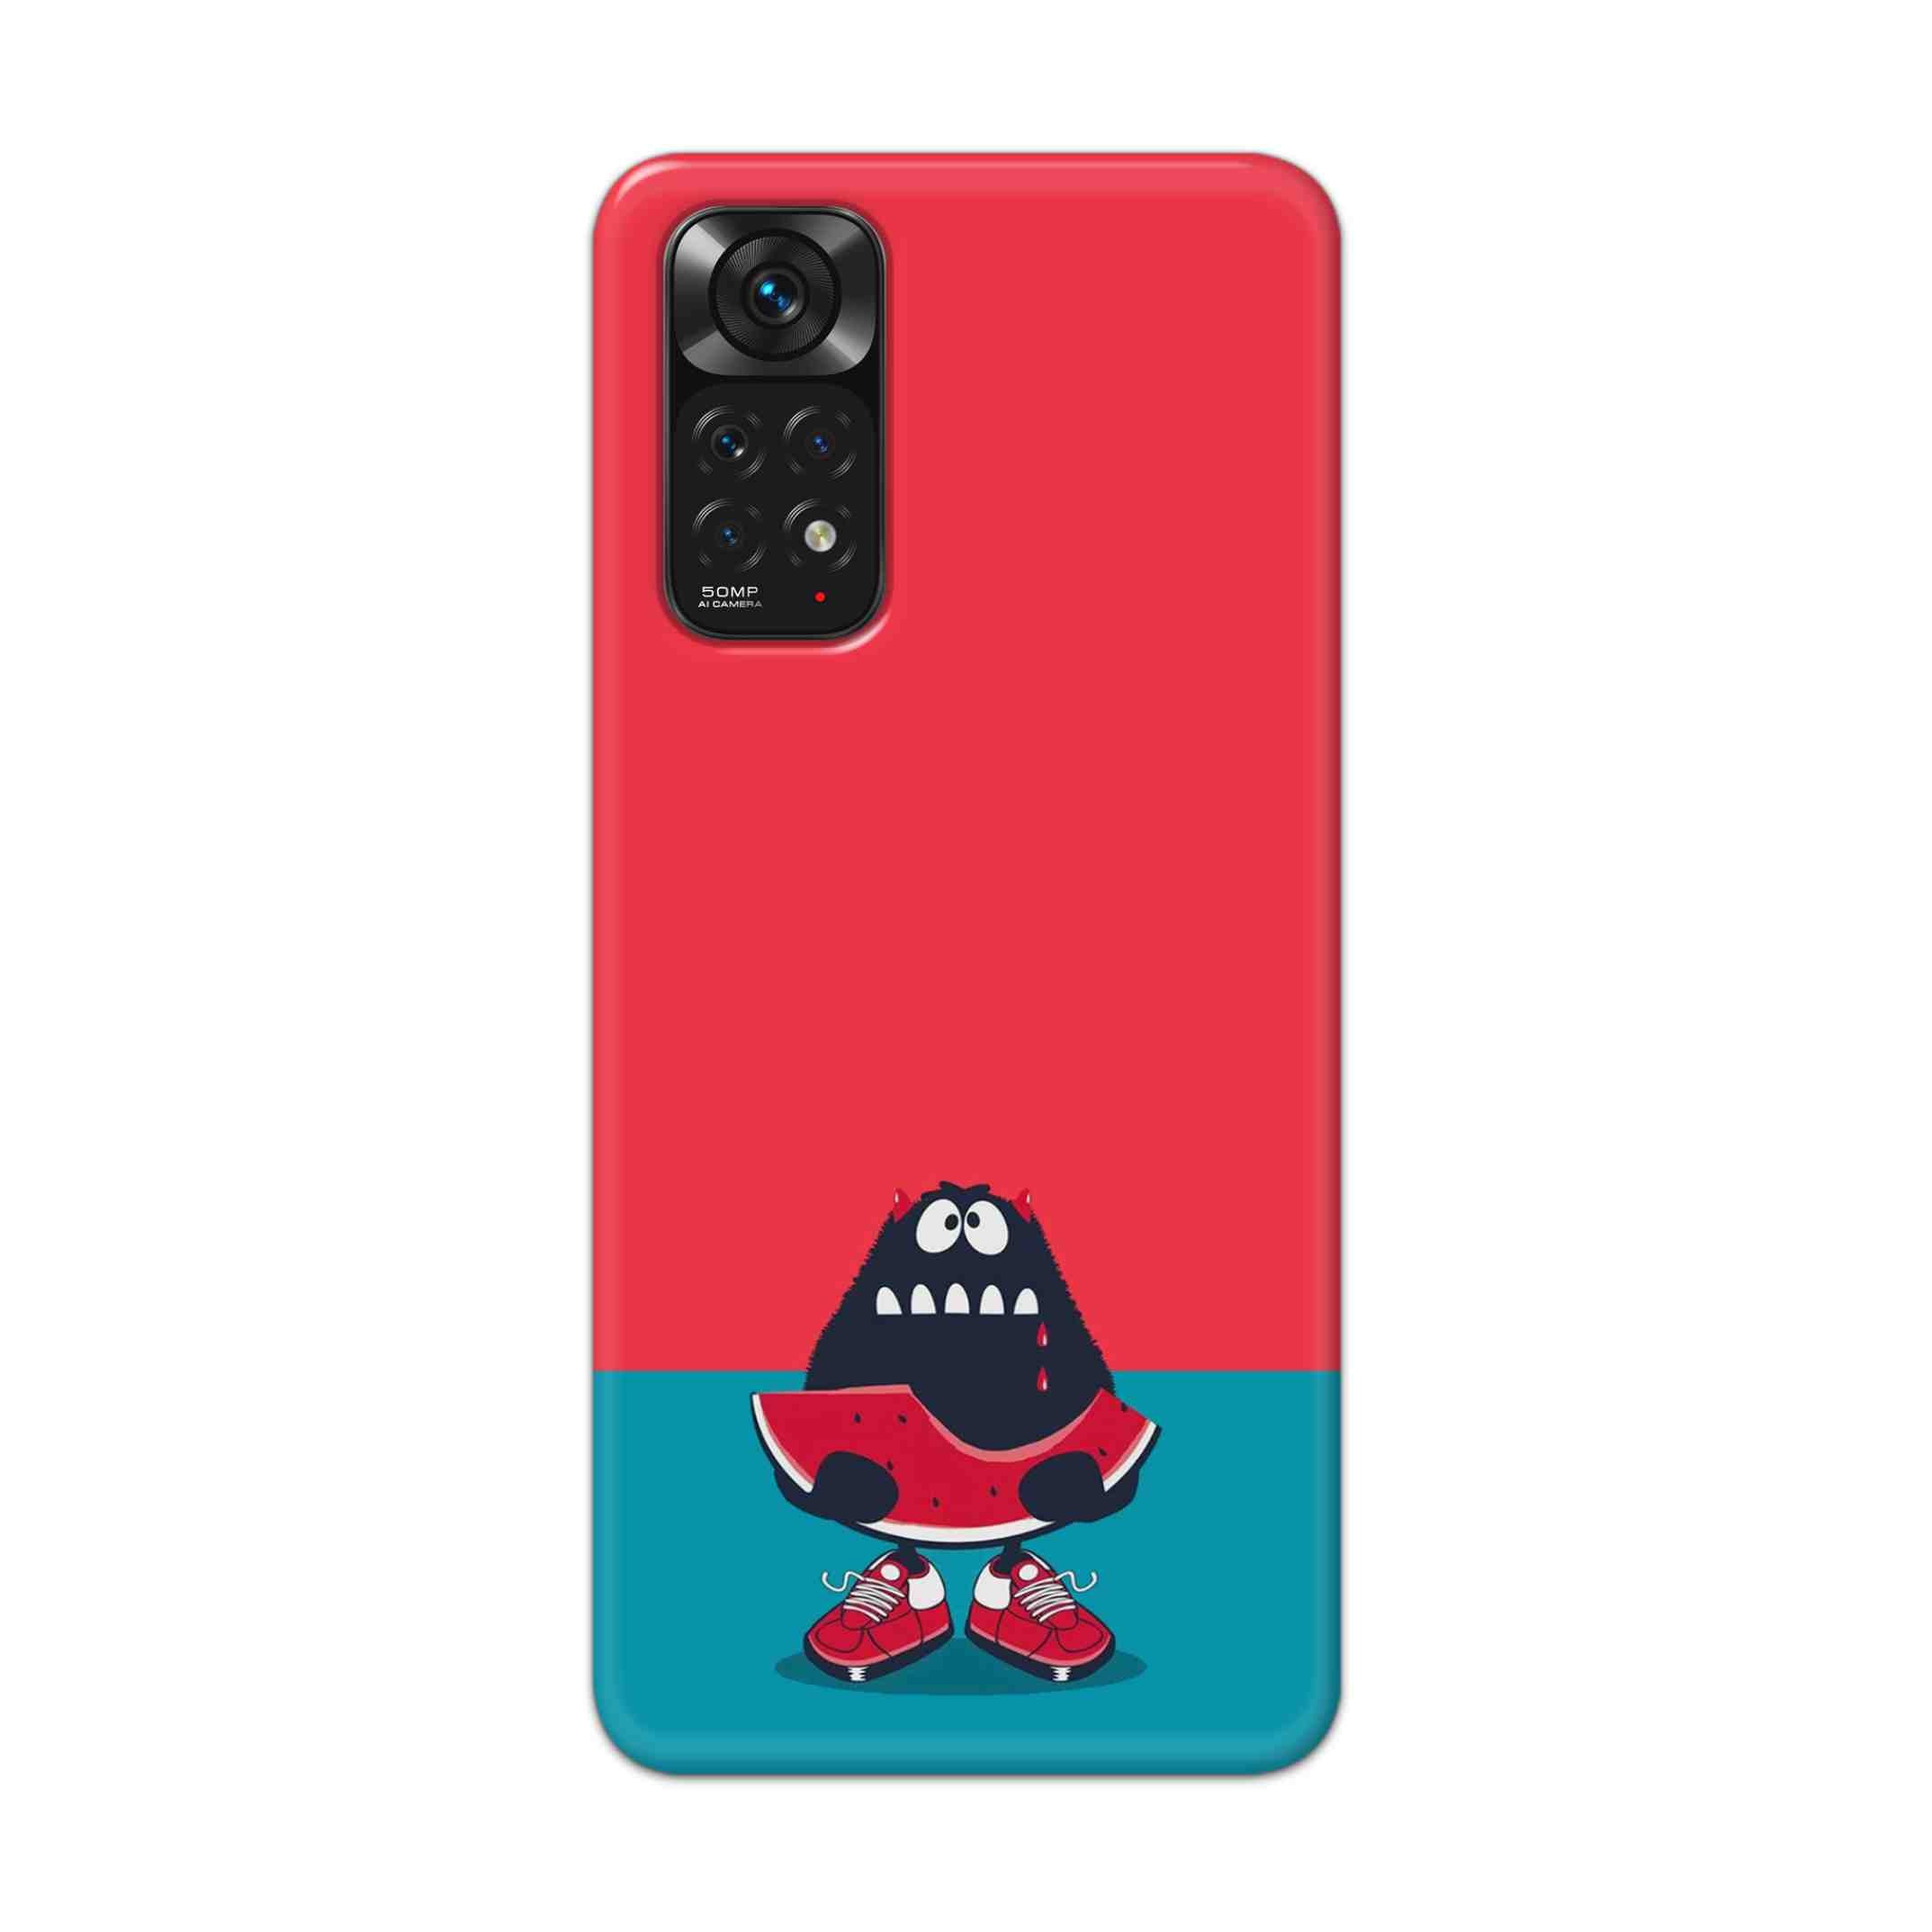 Buy Watermelon Hard Back Mobile Phone Case Cover For Redmi Note 11 Online